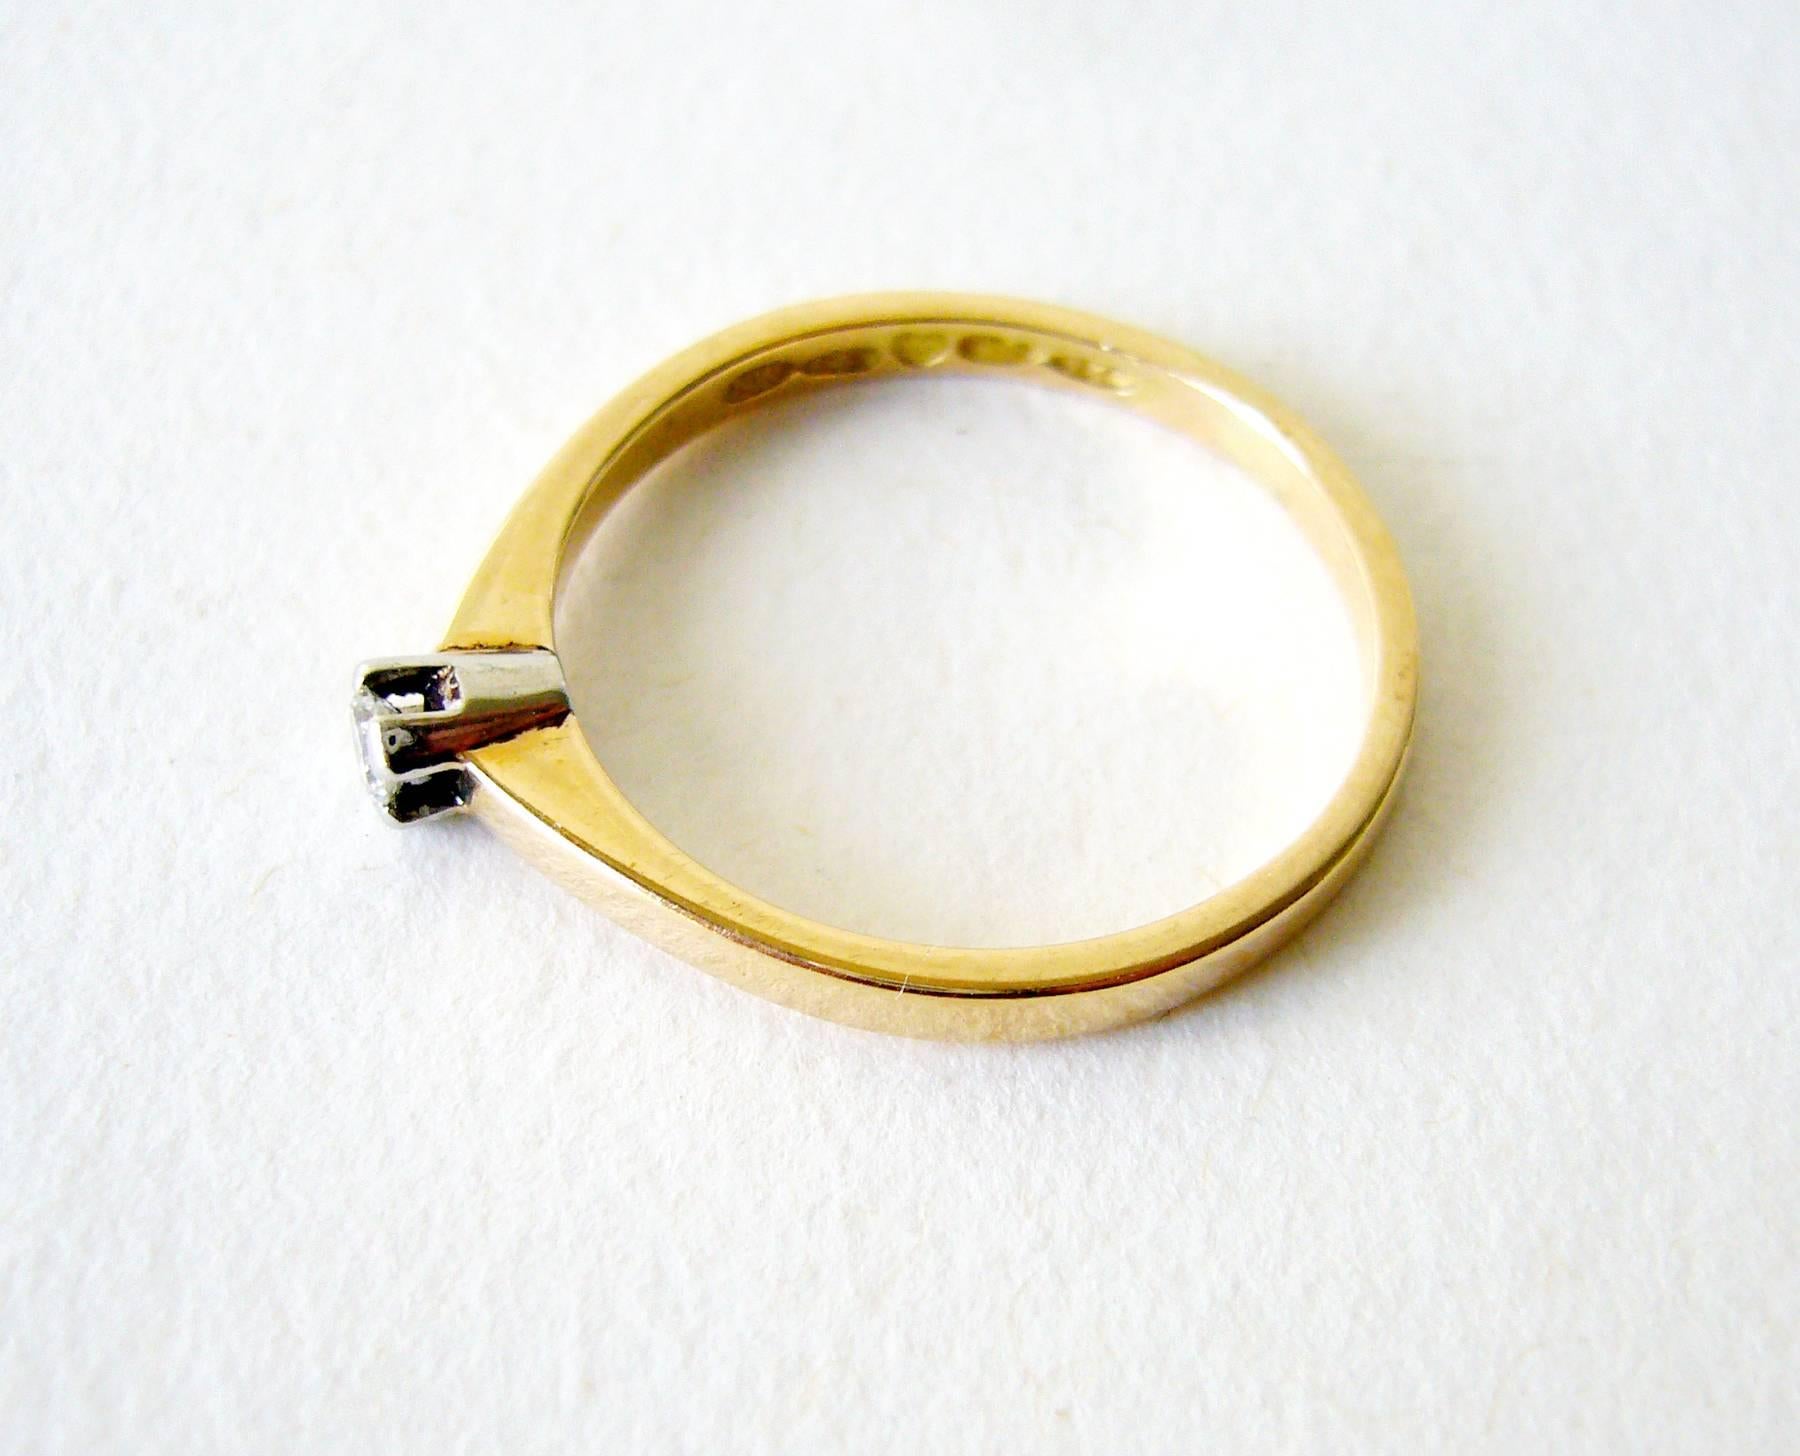 Finnish modern engagement ring of 18k yellow and white gold created by Nils Westerback of Finland.  Ring is a finger size 6.75 and is signed NW, 750, T7 (1972), Finnish Crown Hallmark.  In very good vintage condition.  2.4 grams.  